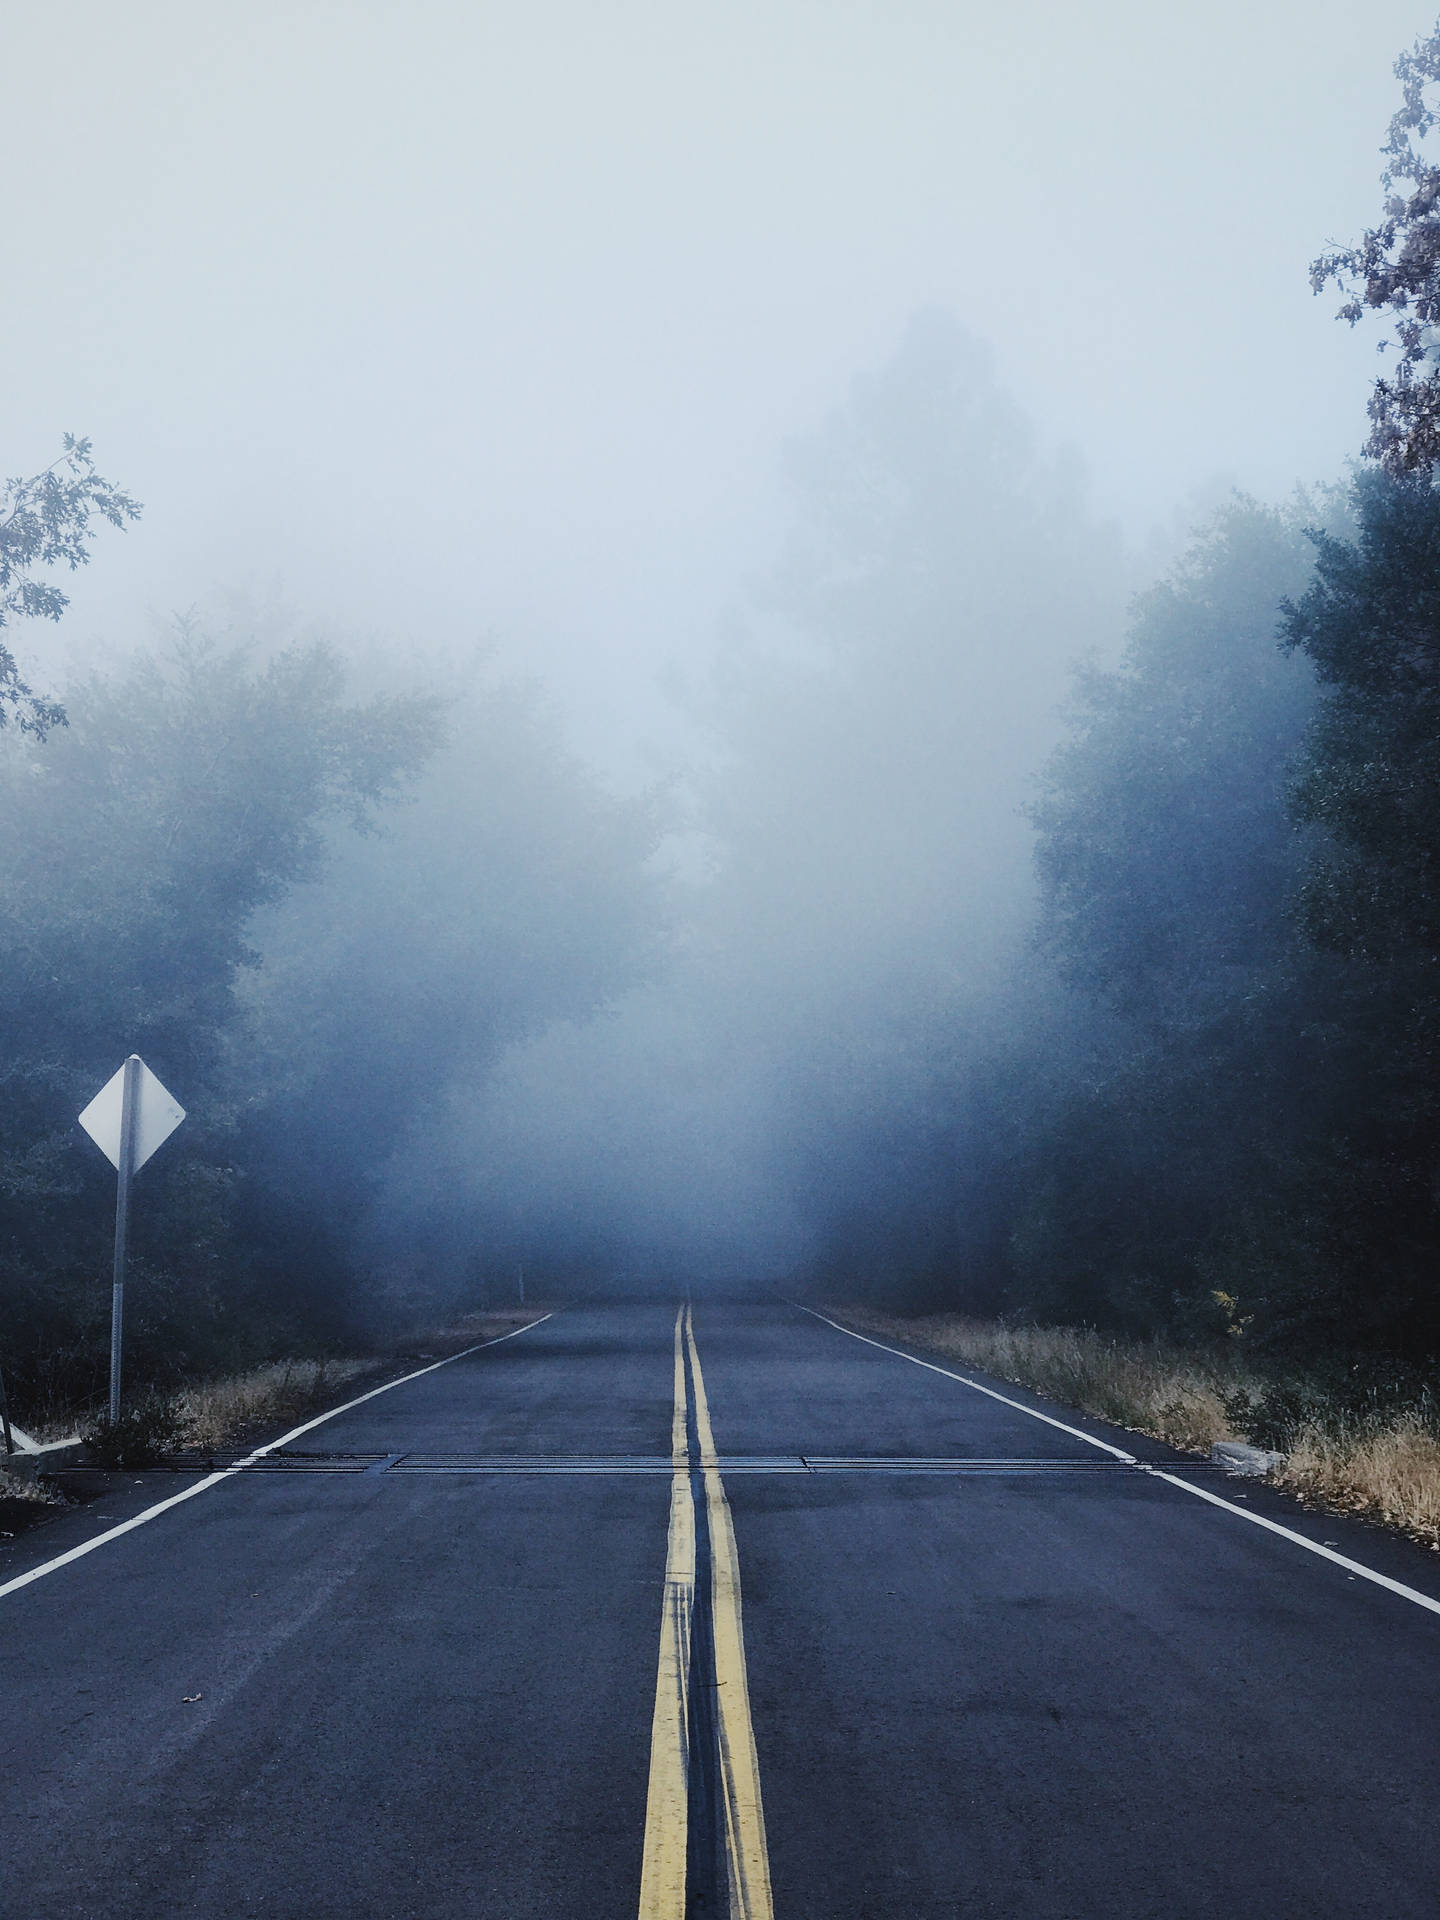 Ominous Foggy Road In The Daytime Wallpaper